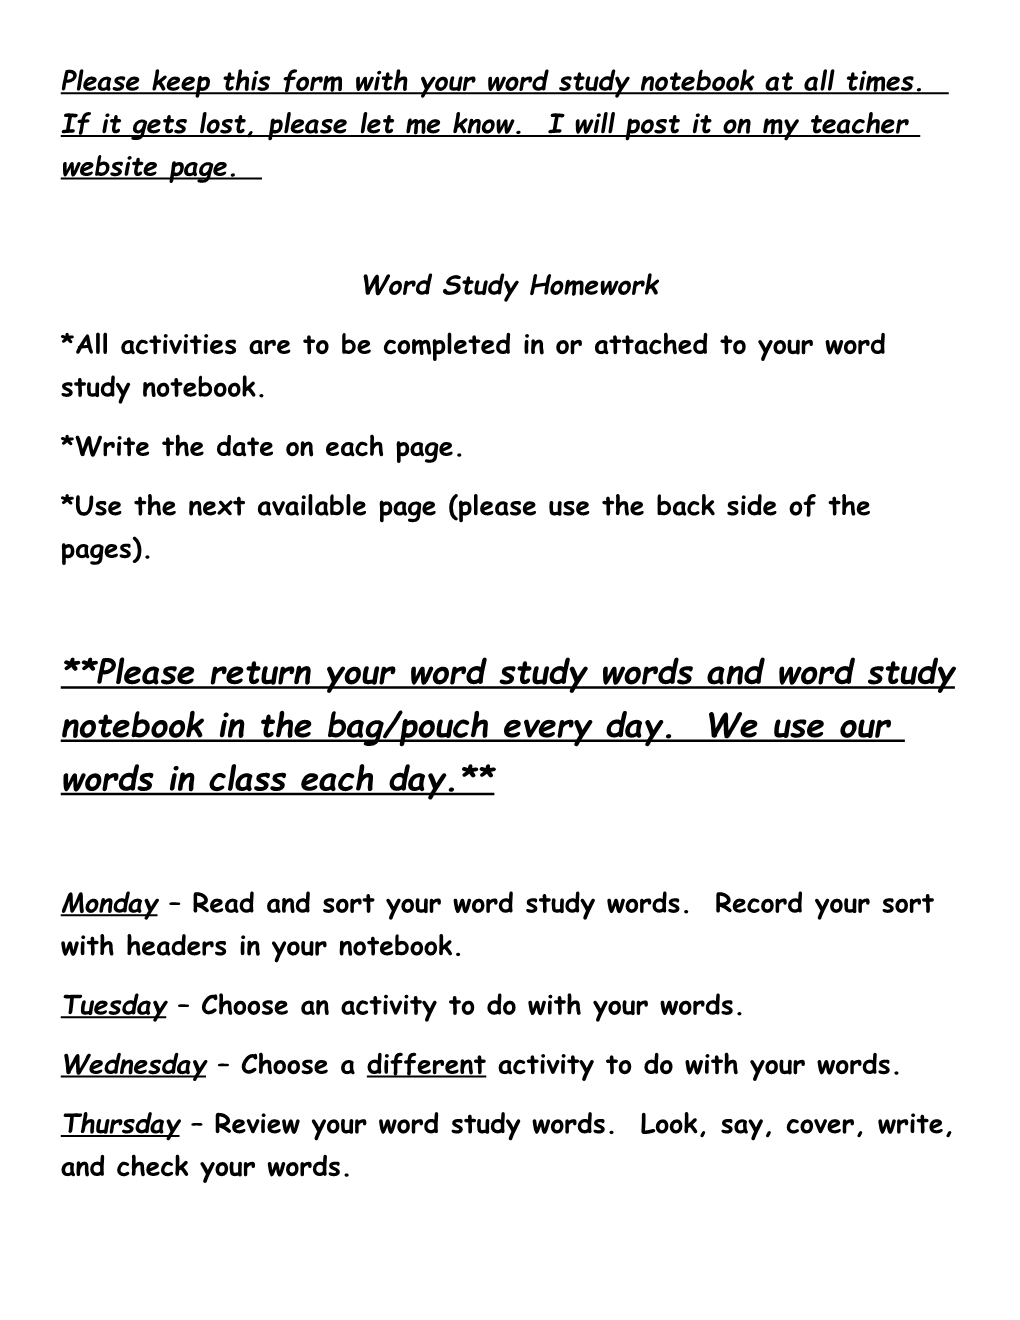 *All Activities Are to Be Completed in Or Attached to Your Word Study Notebook